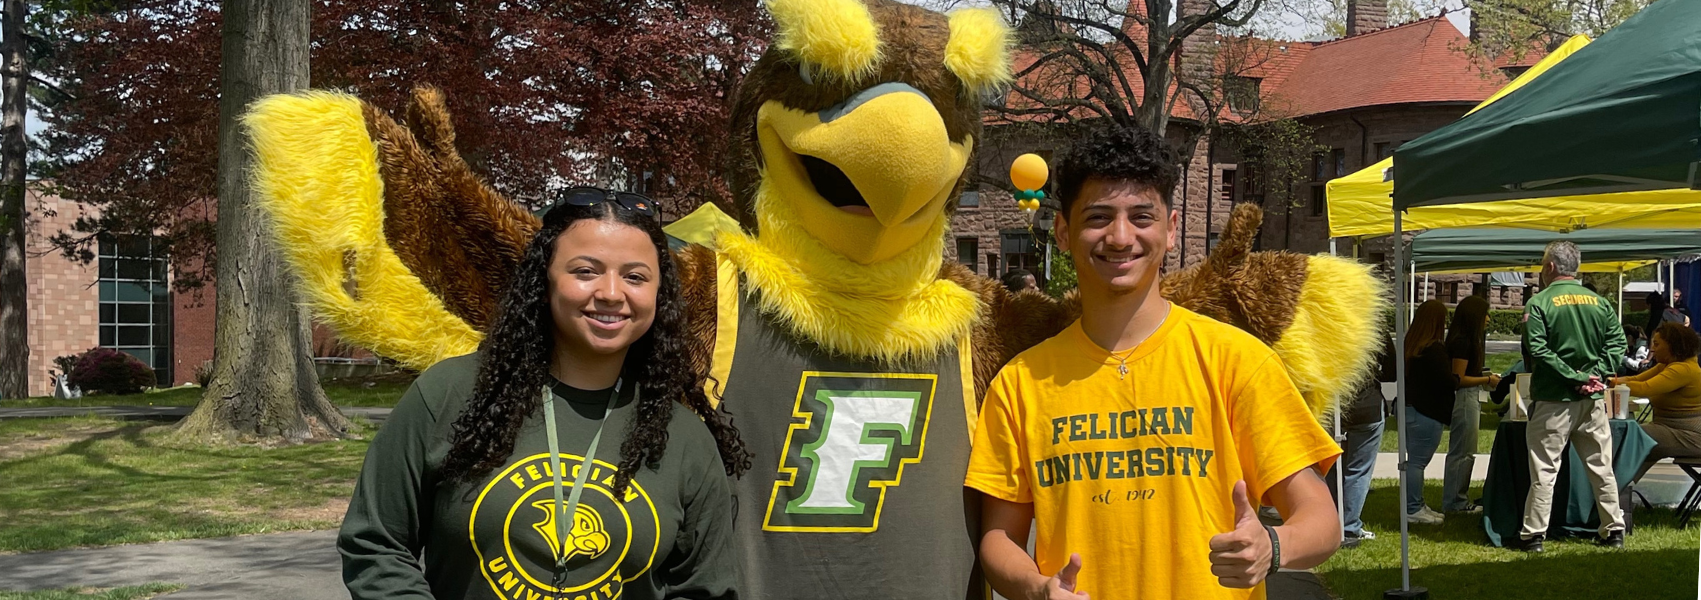 students with Frankie the mascot